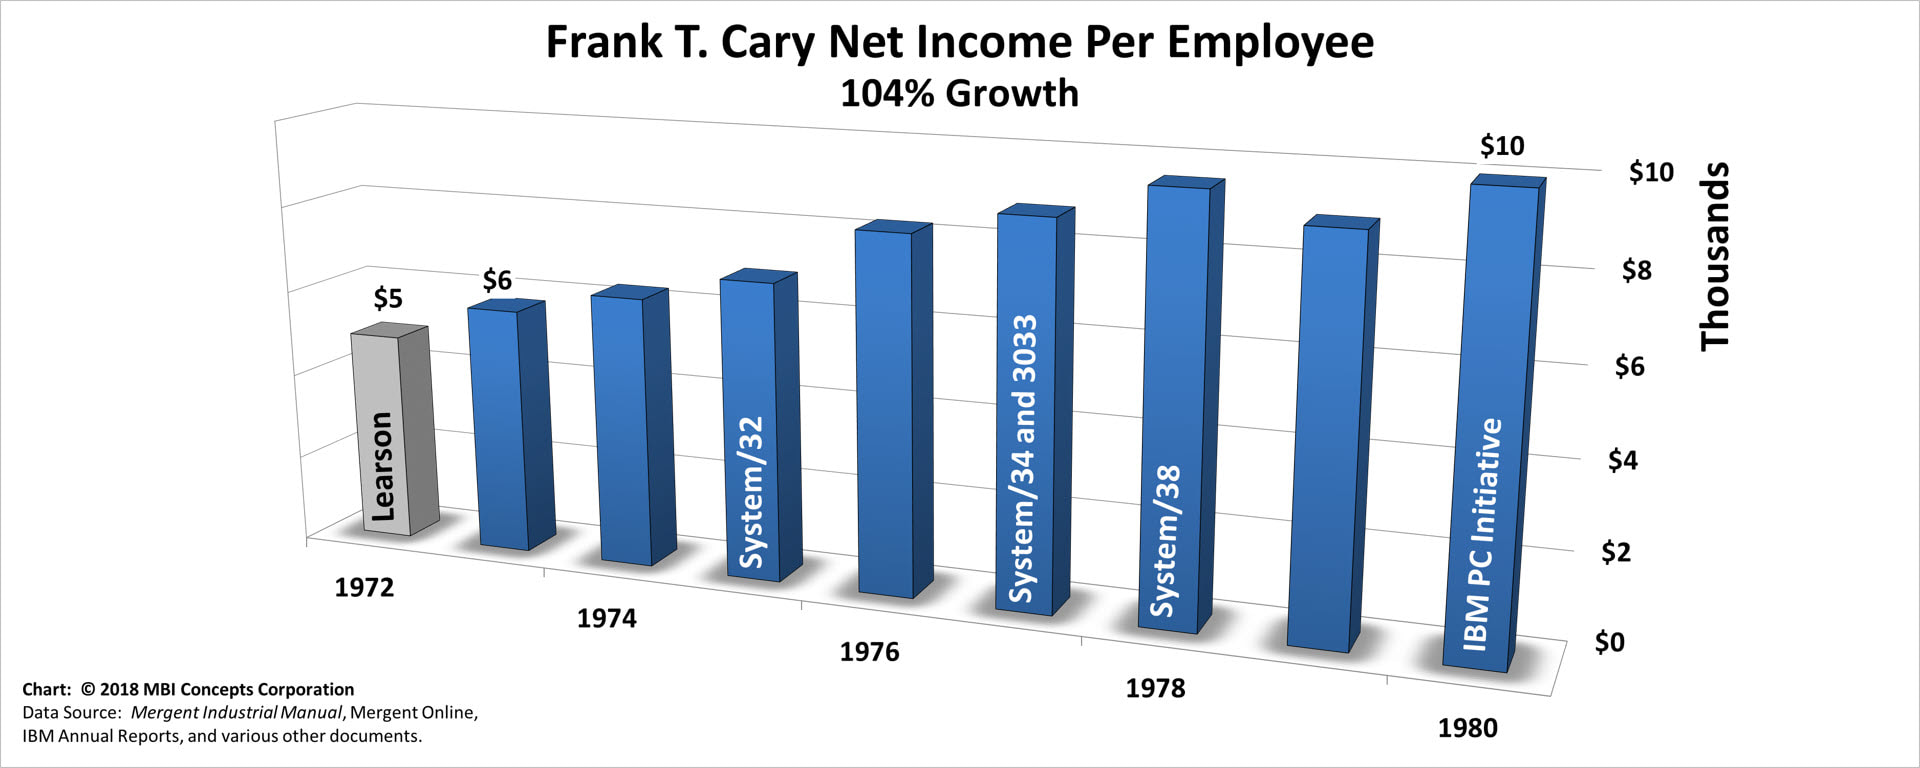 A color bar chart showing IBM's yearly net income (profit) per employee from 1971 to 1980 for IBM Chief Executive Officer Frank T. Cary.